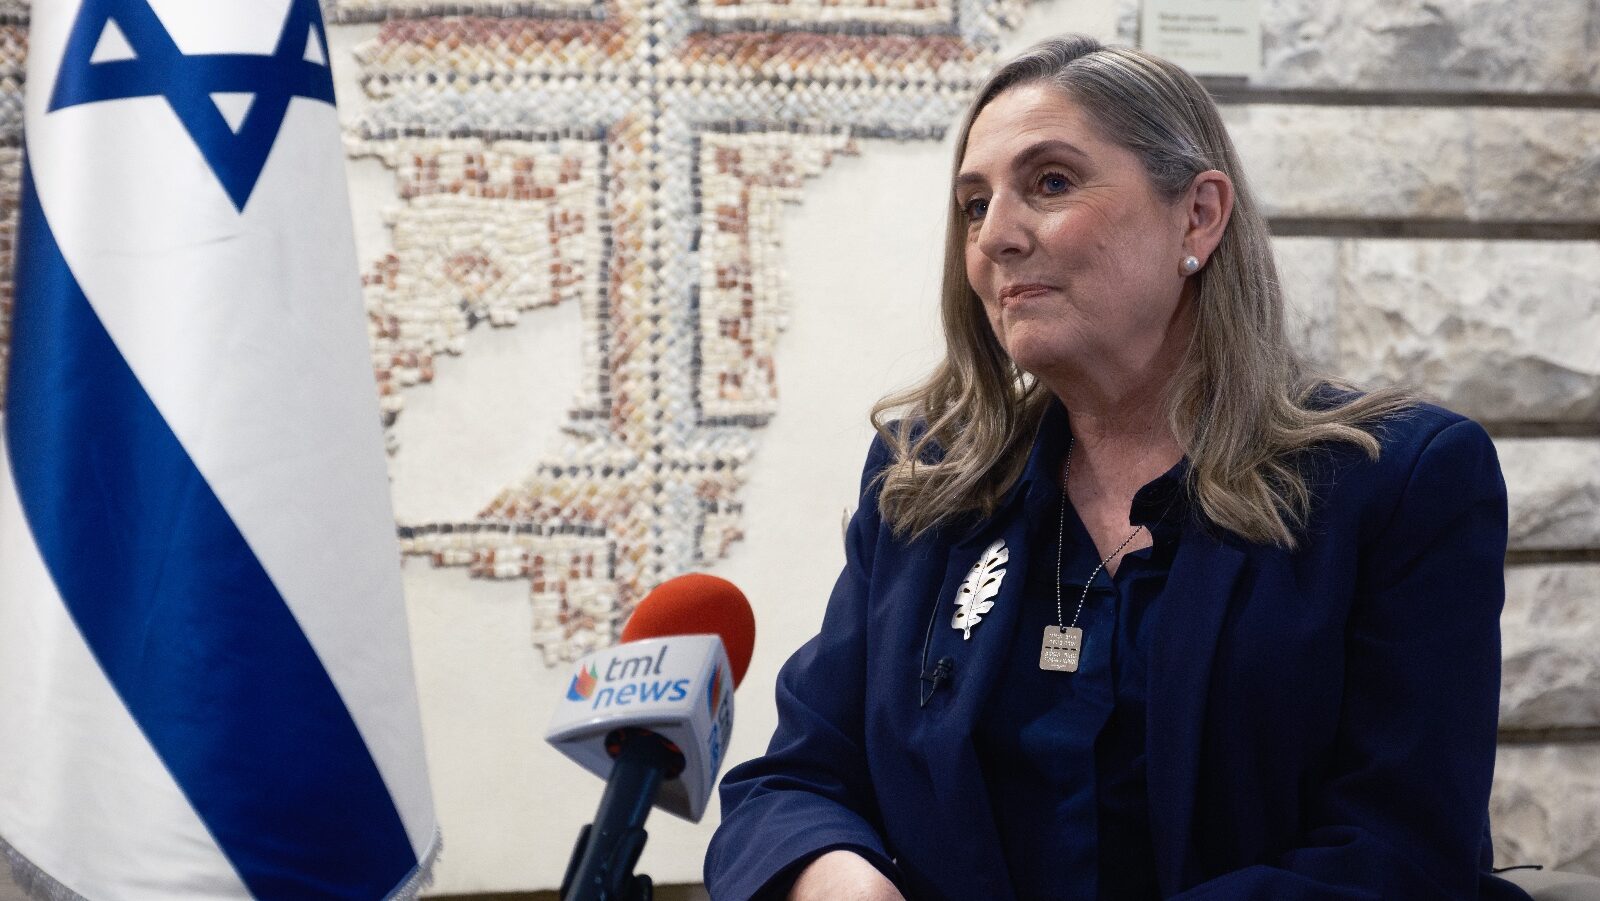 EXCLUSIVE: The Media Line Interviews Israel’s First Lady Michal Herzog on the War and the Need To Fight Ignorance With Truth